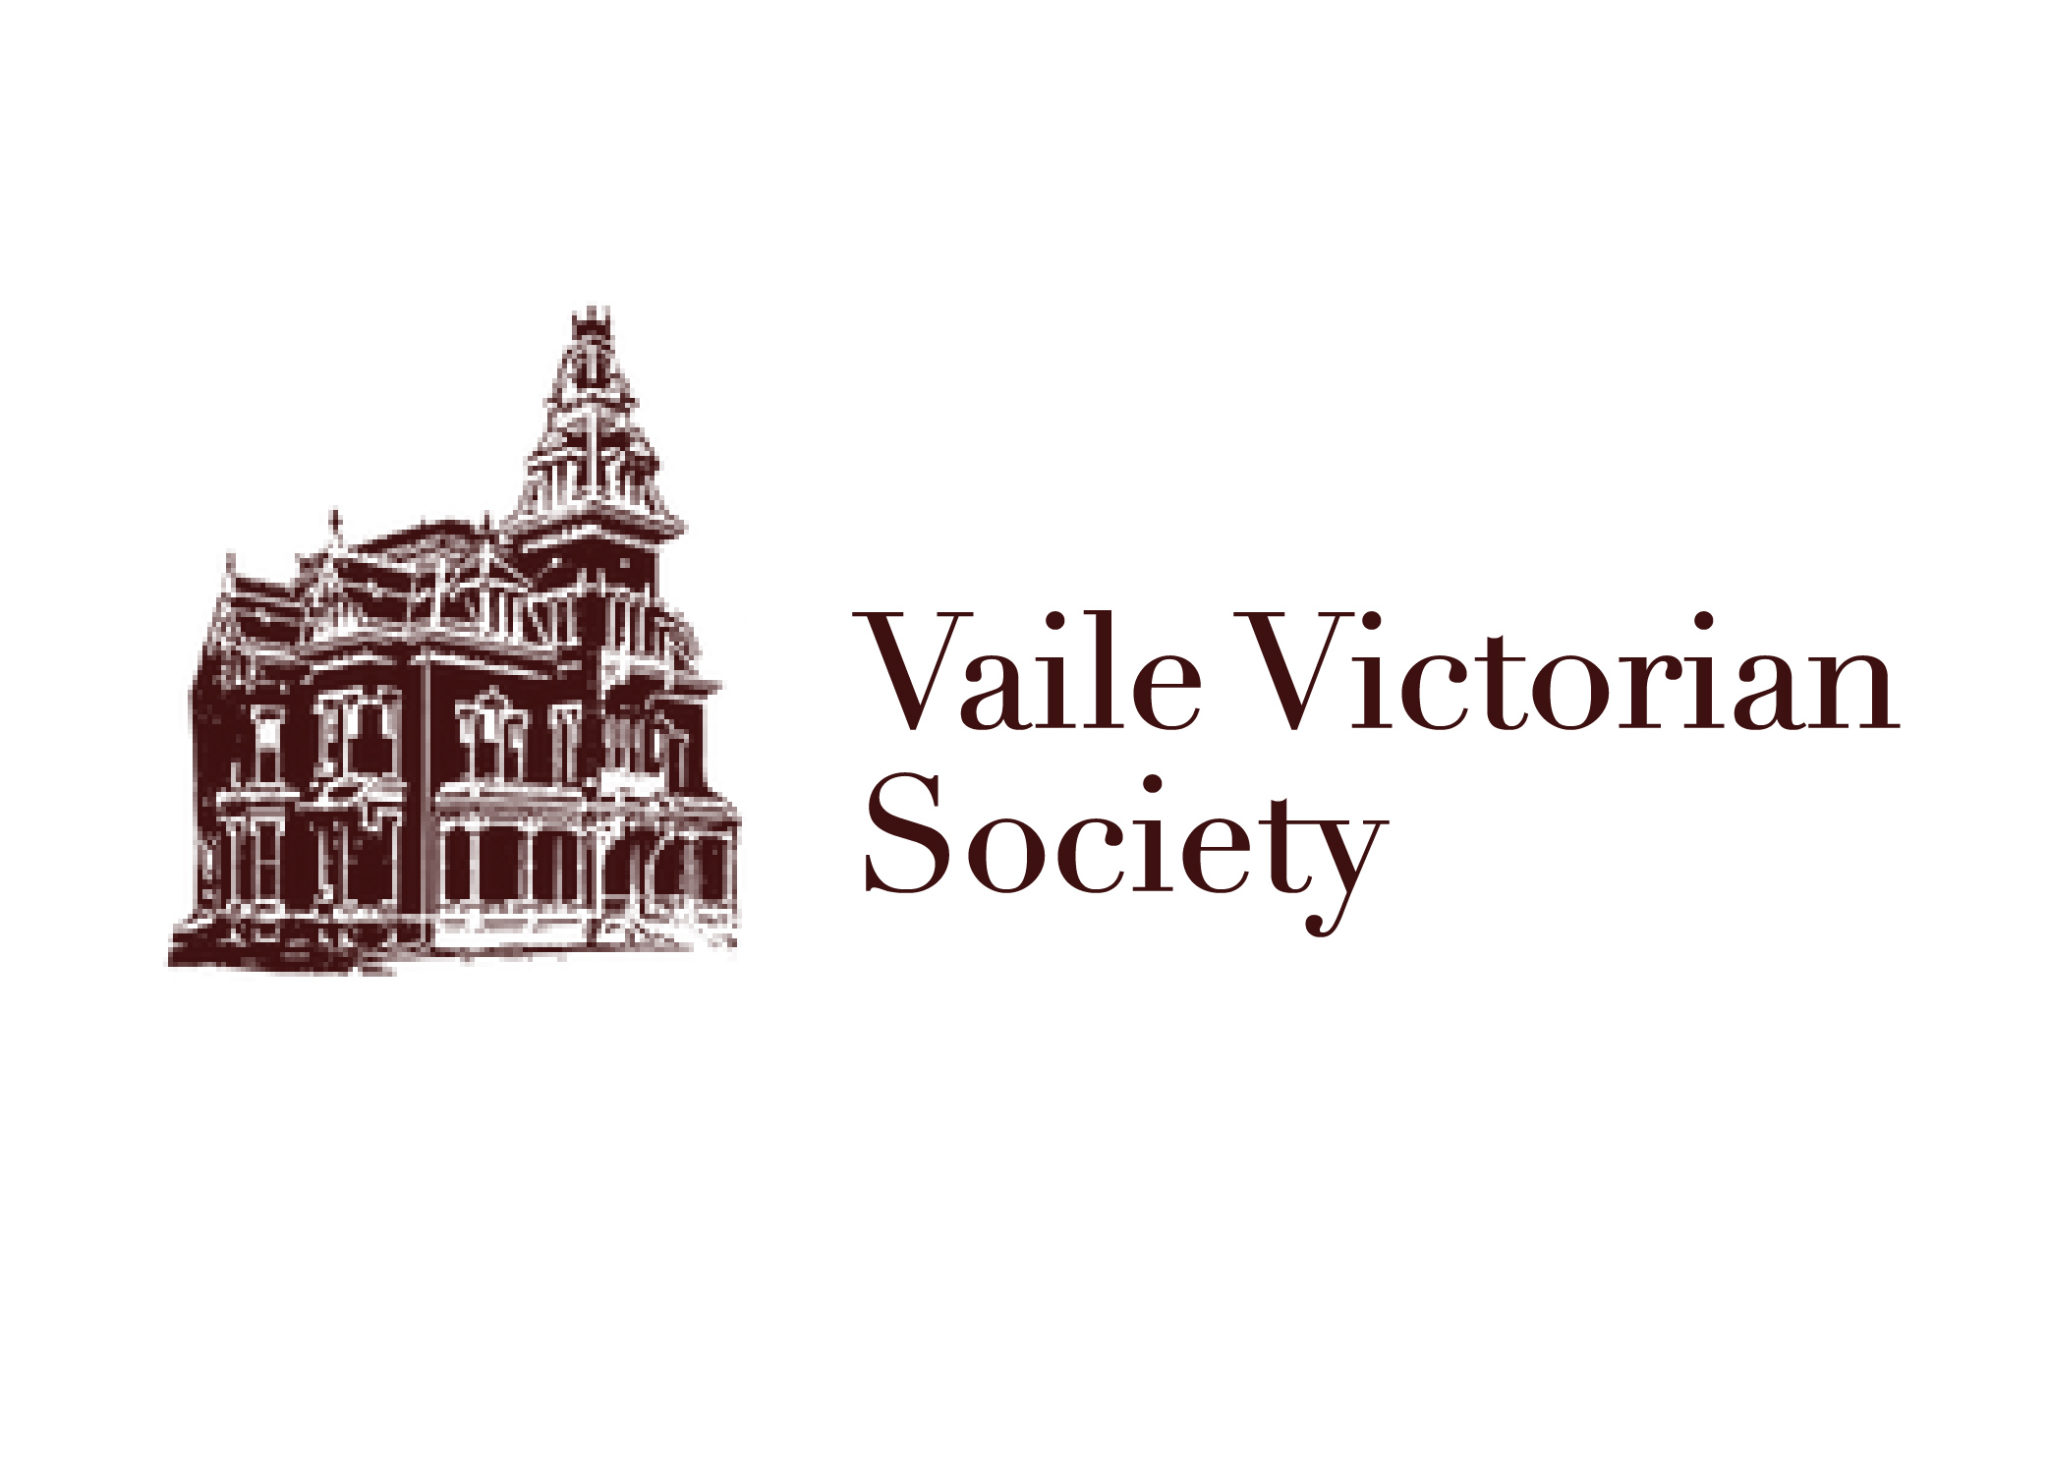 The Victorian Society of Vaile Mansion